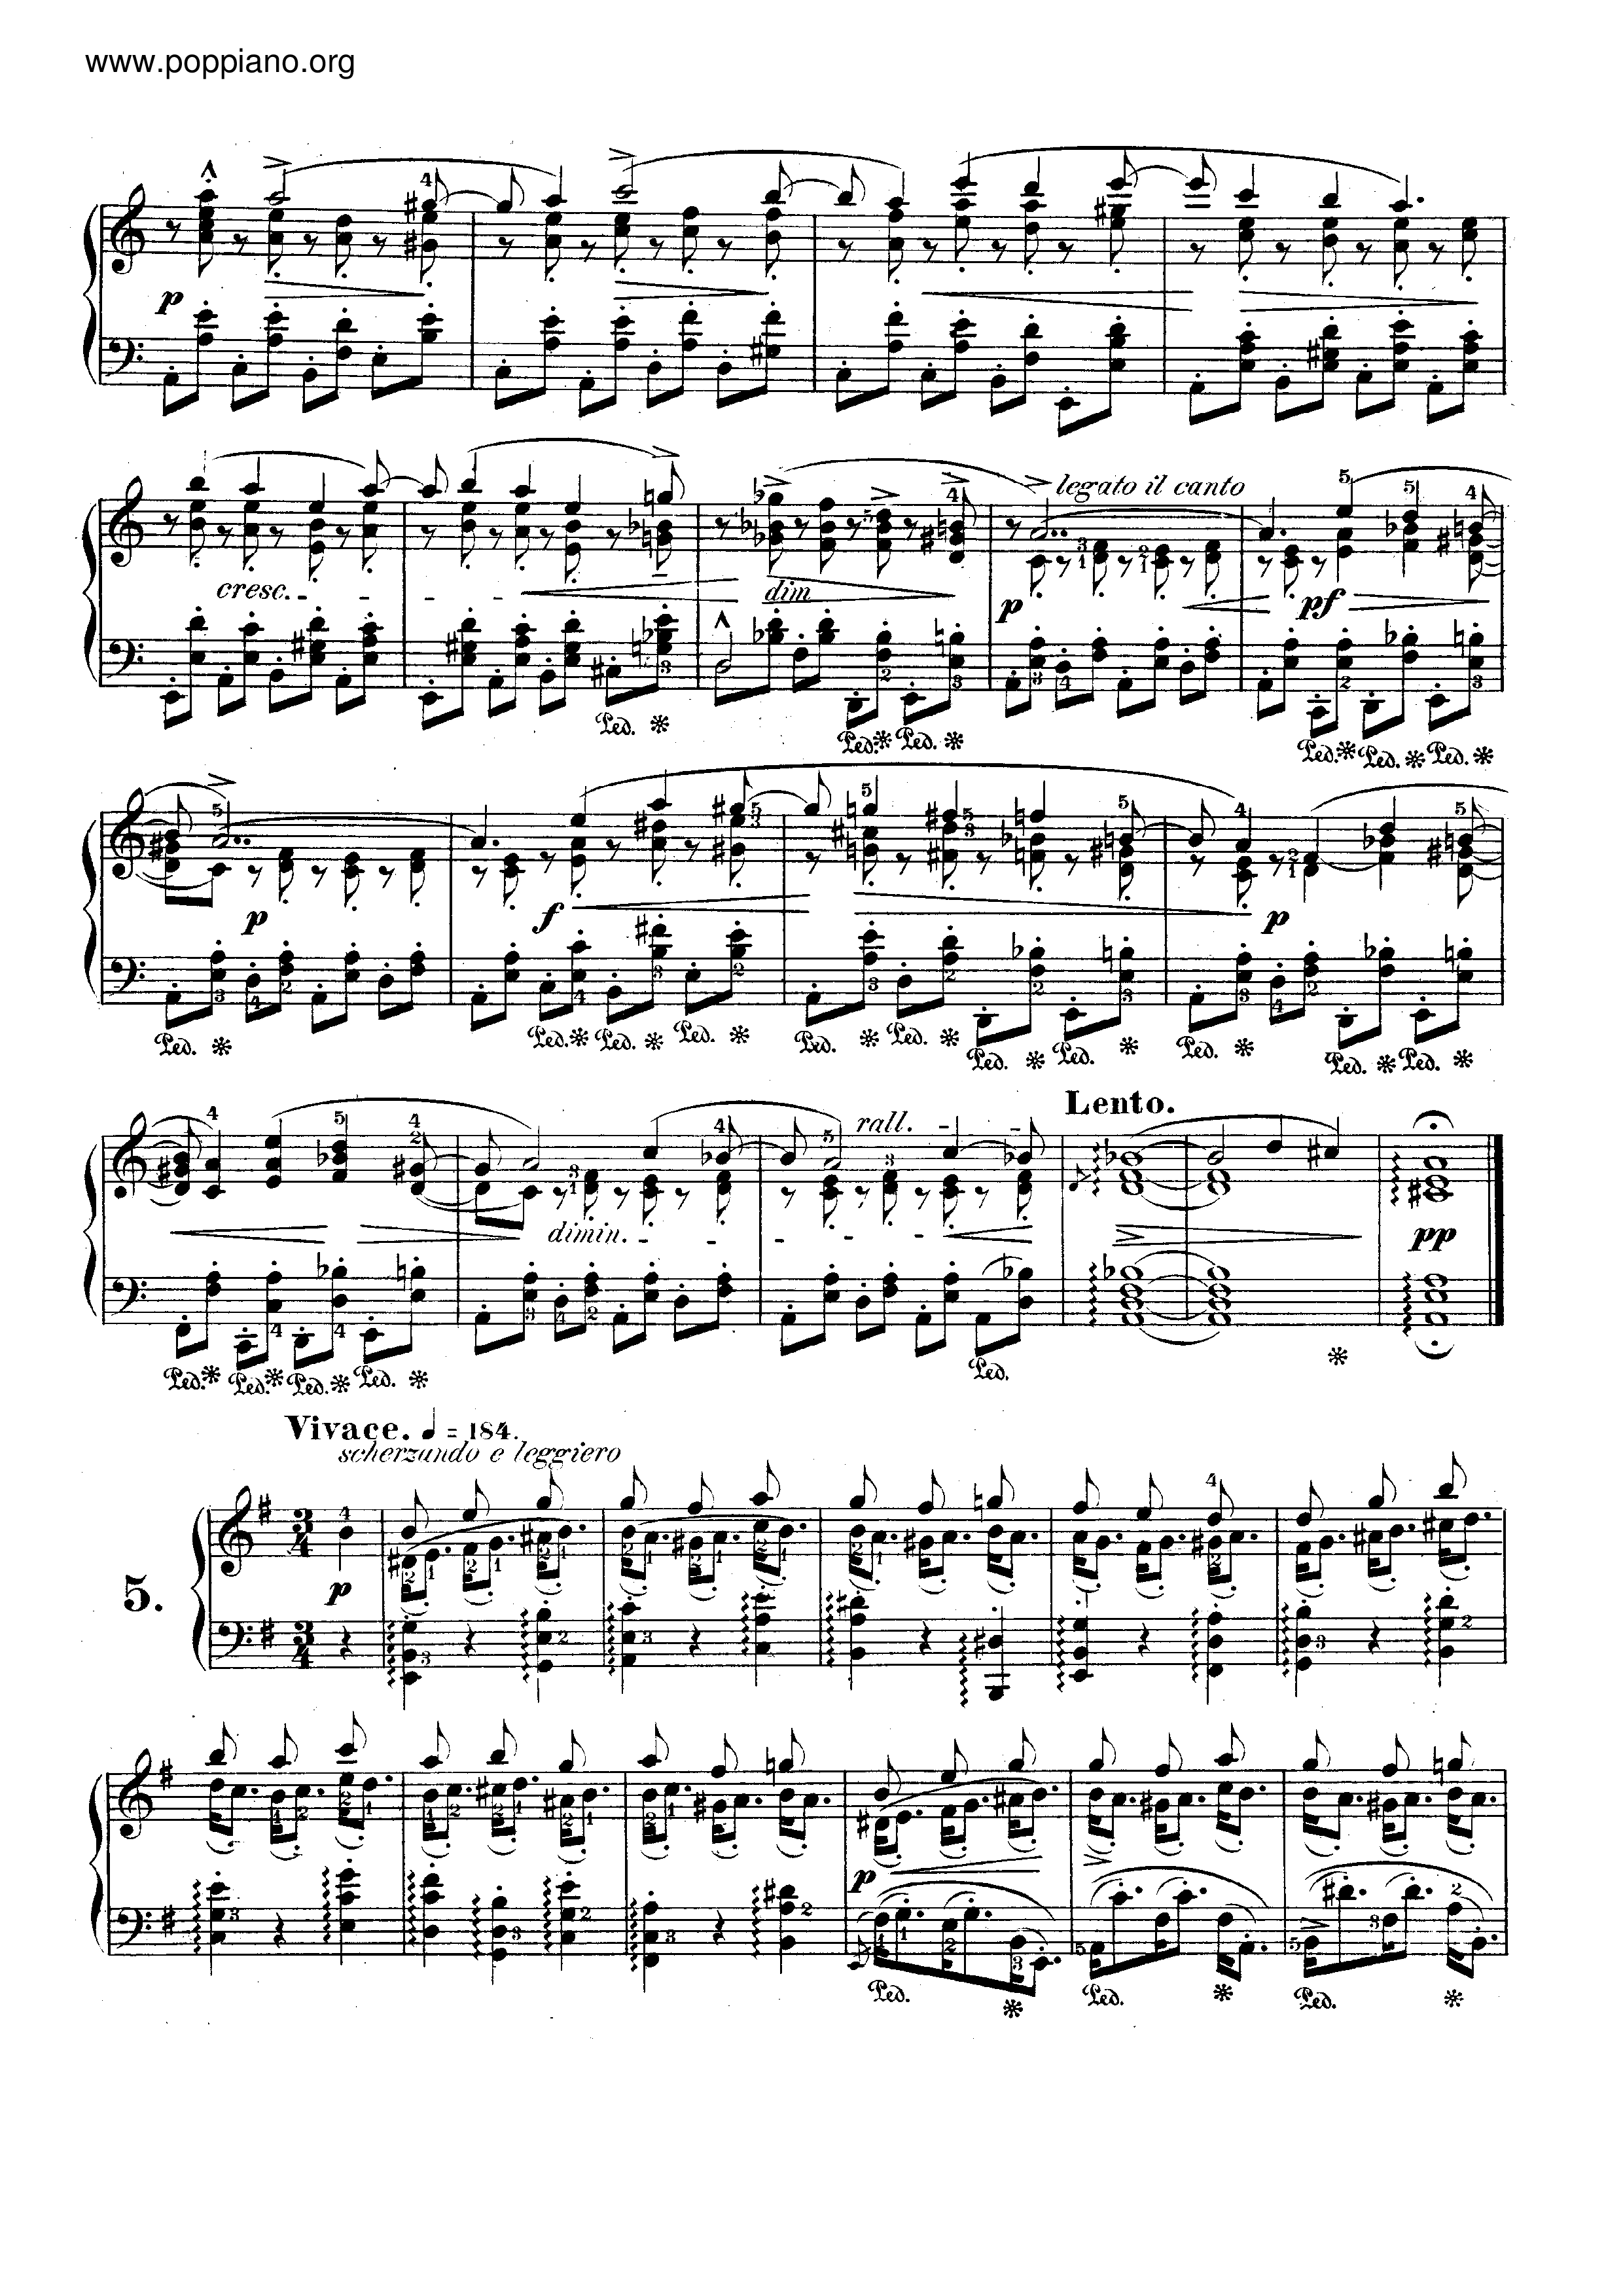 12 Études, Op. 25: No. 5 in E Minor Wrong Noteピアノ譜